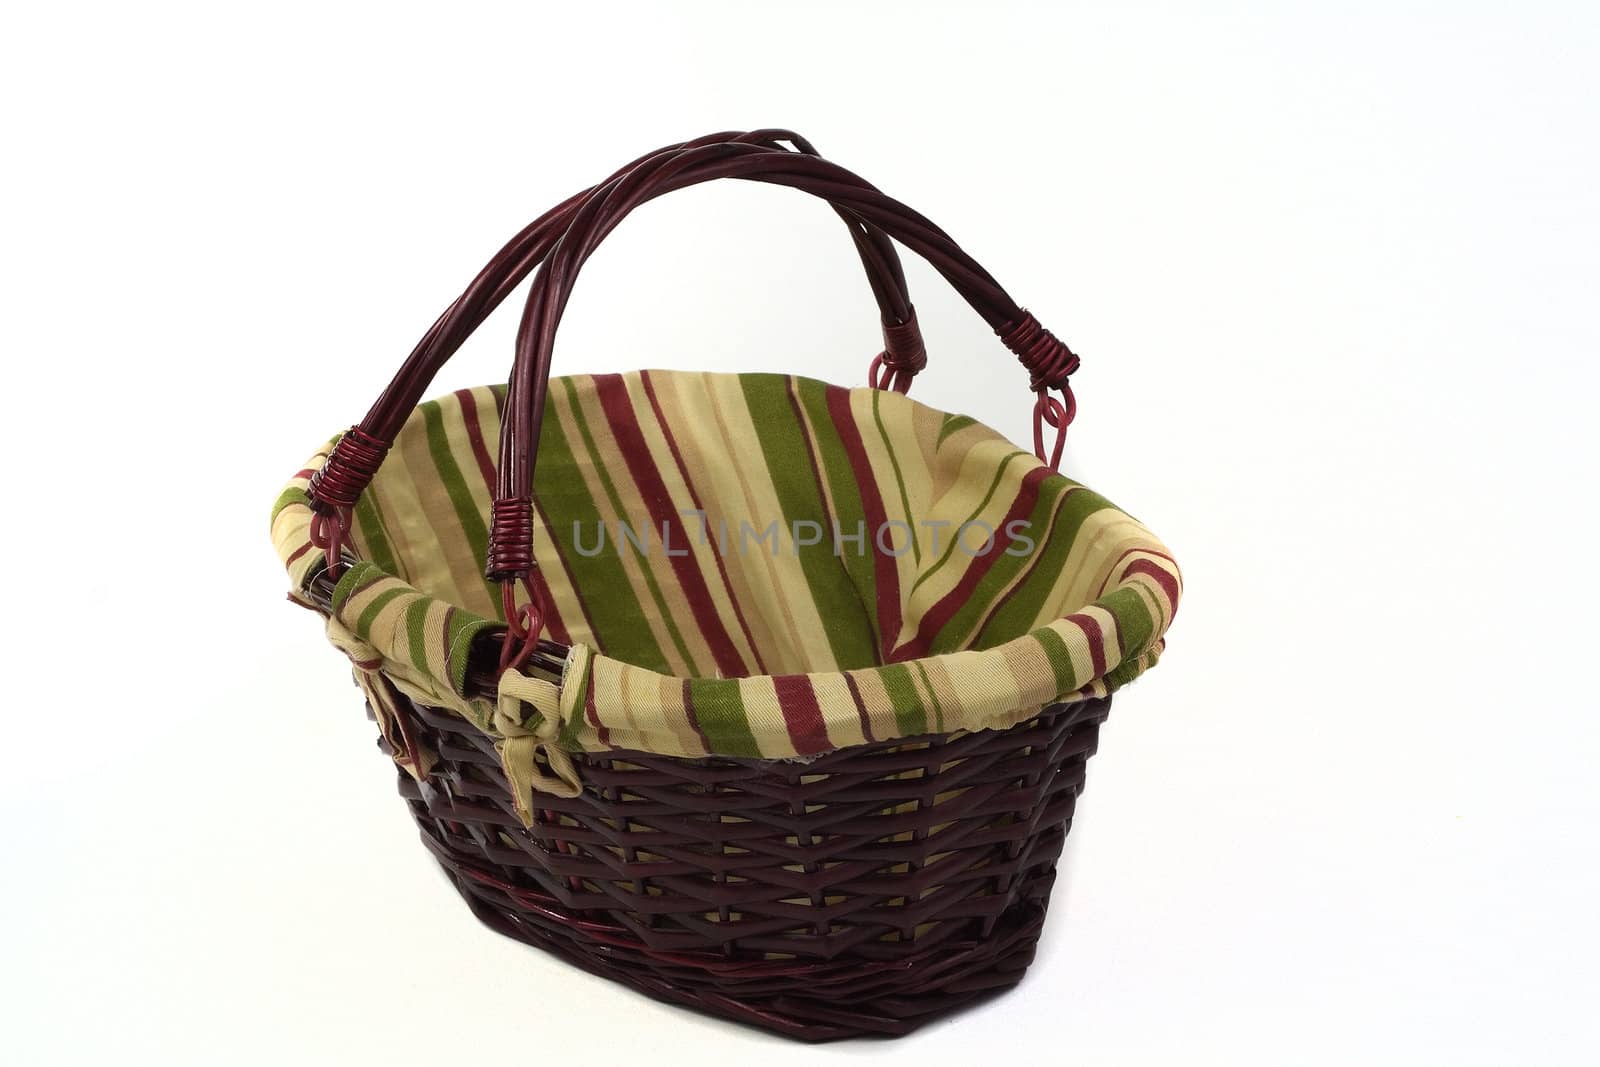 Cane basket with stripped cloth and handles isolated on white background